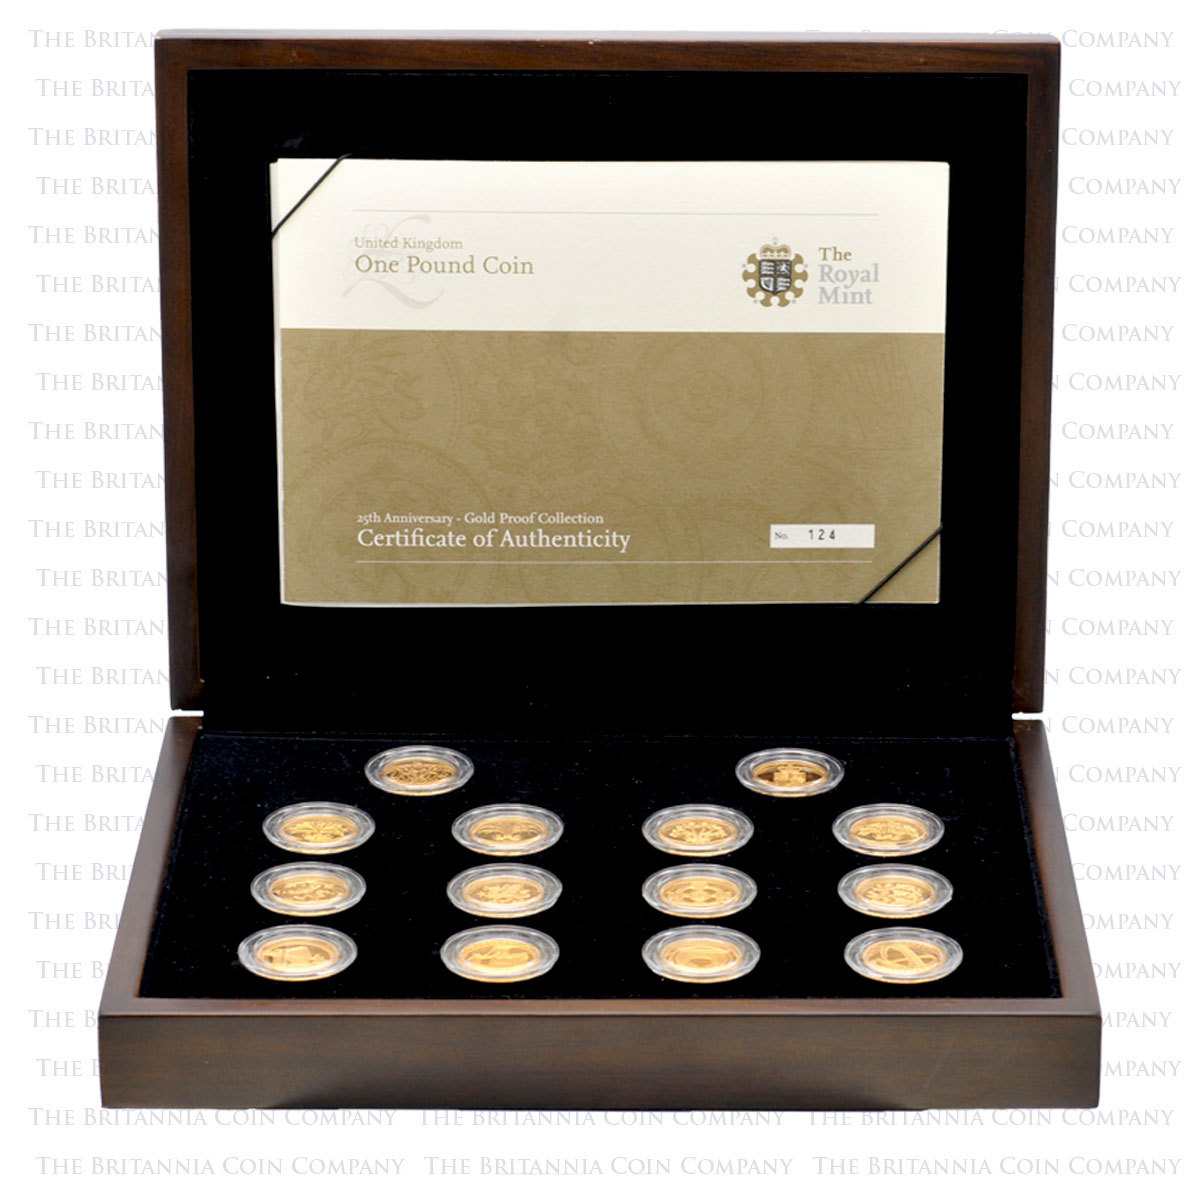 2008 One Pound Coin 25th Anniversary Gold Proof Collection